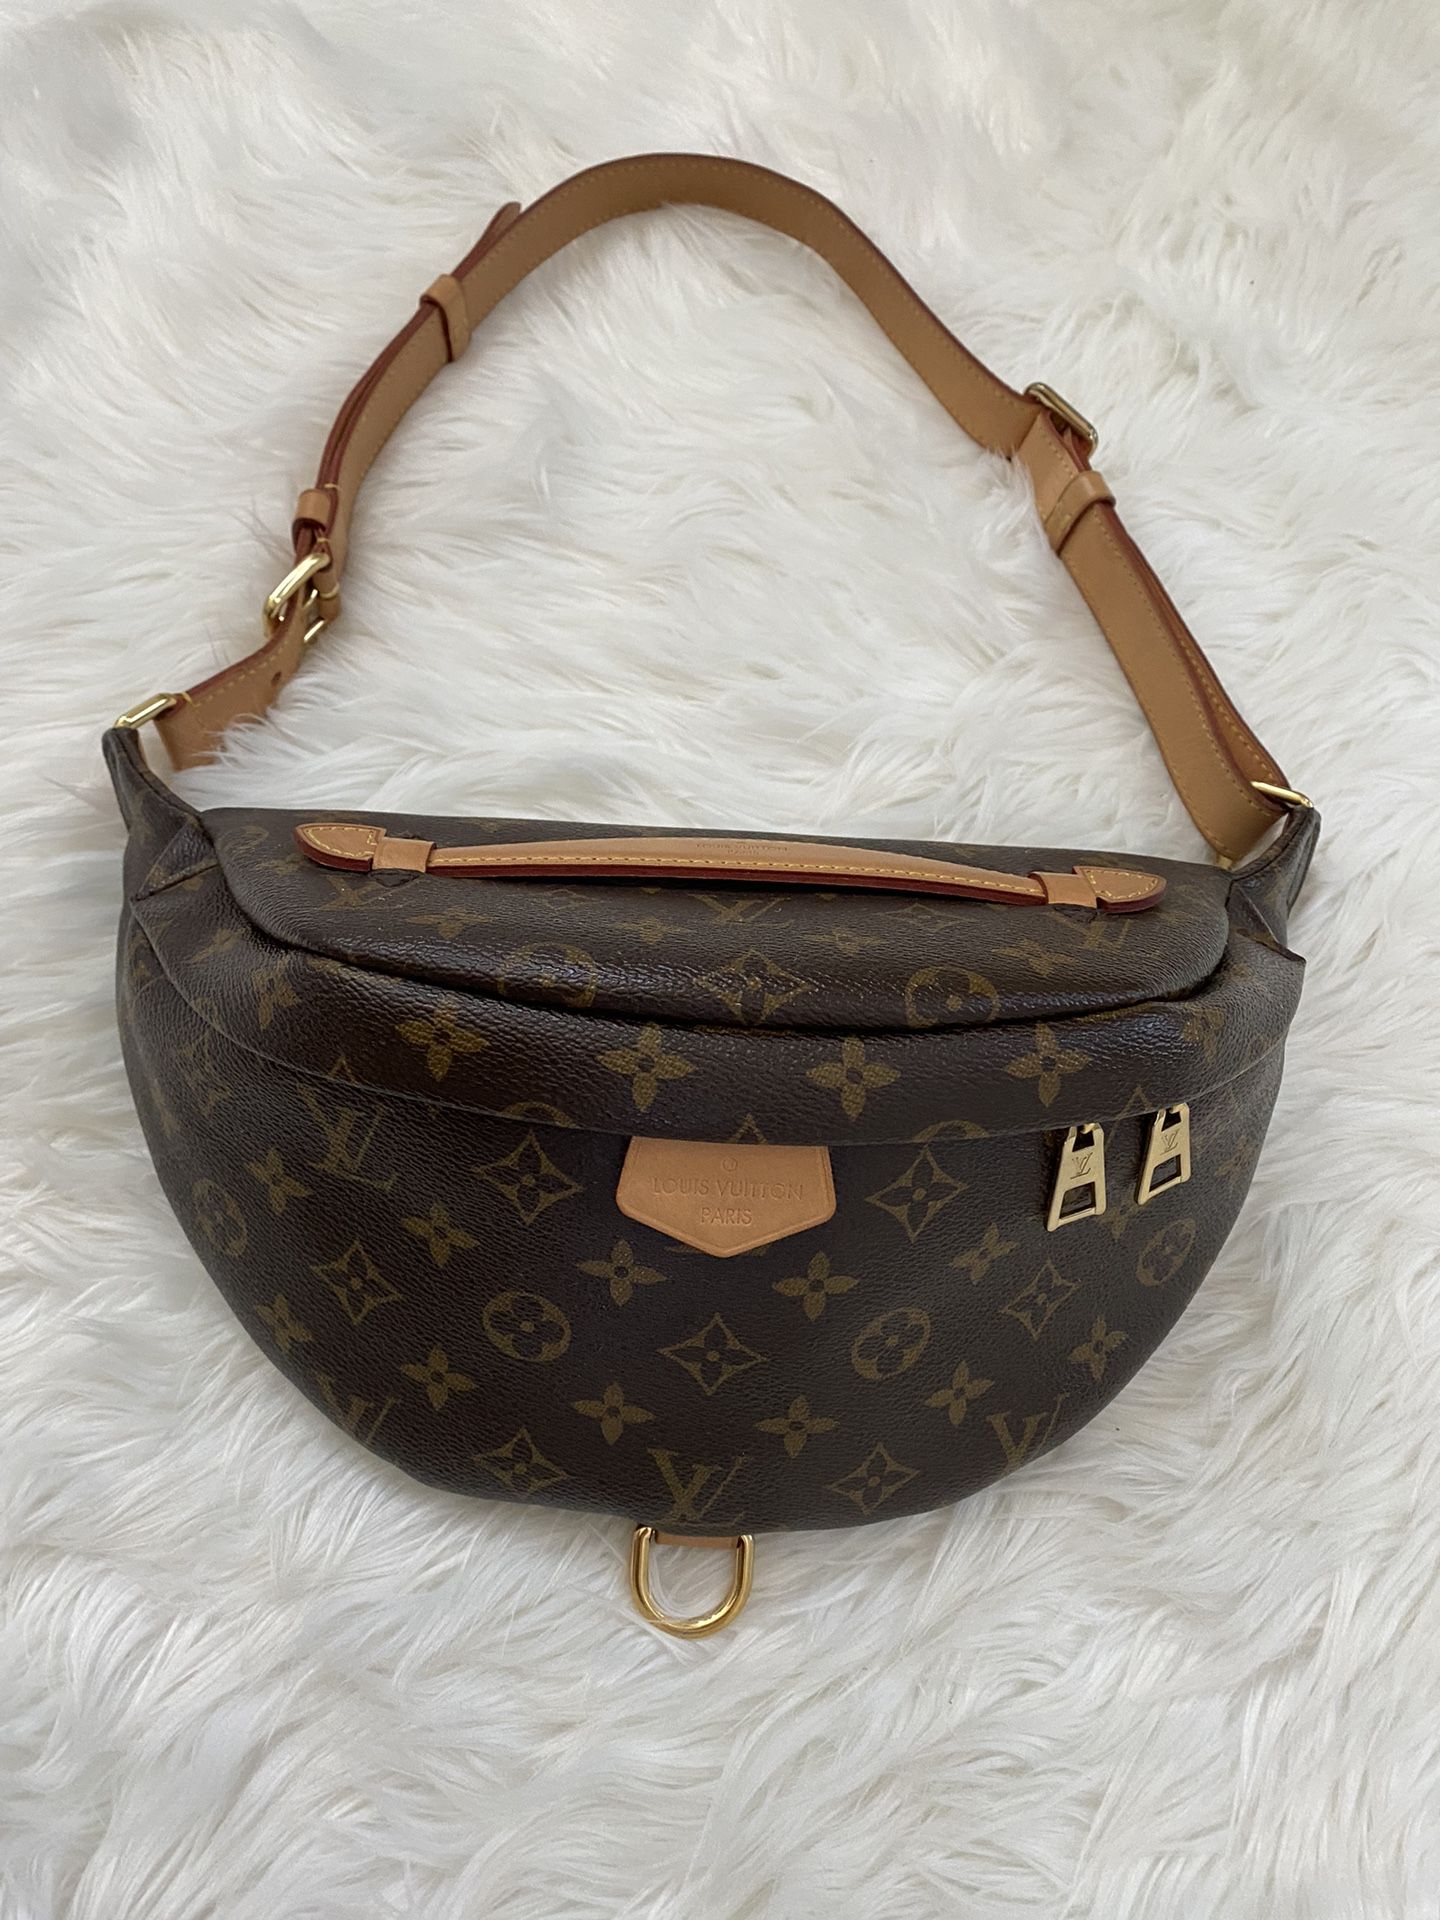 Authentic Louis Vuitton monogram Bumbag for Sale in Brentwood, CA - OfferUp